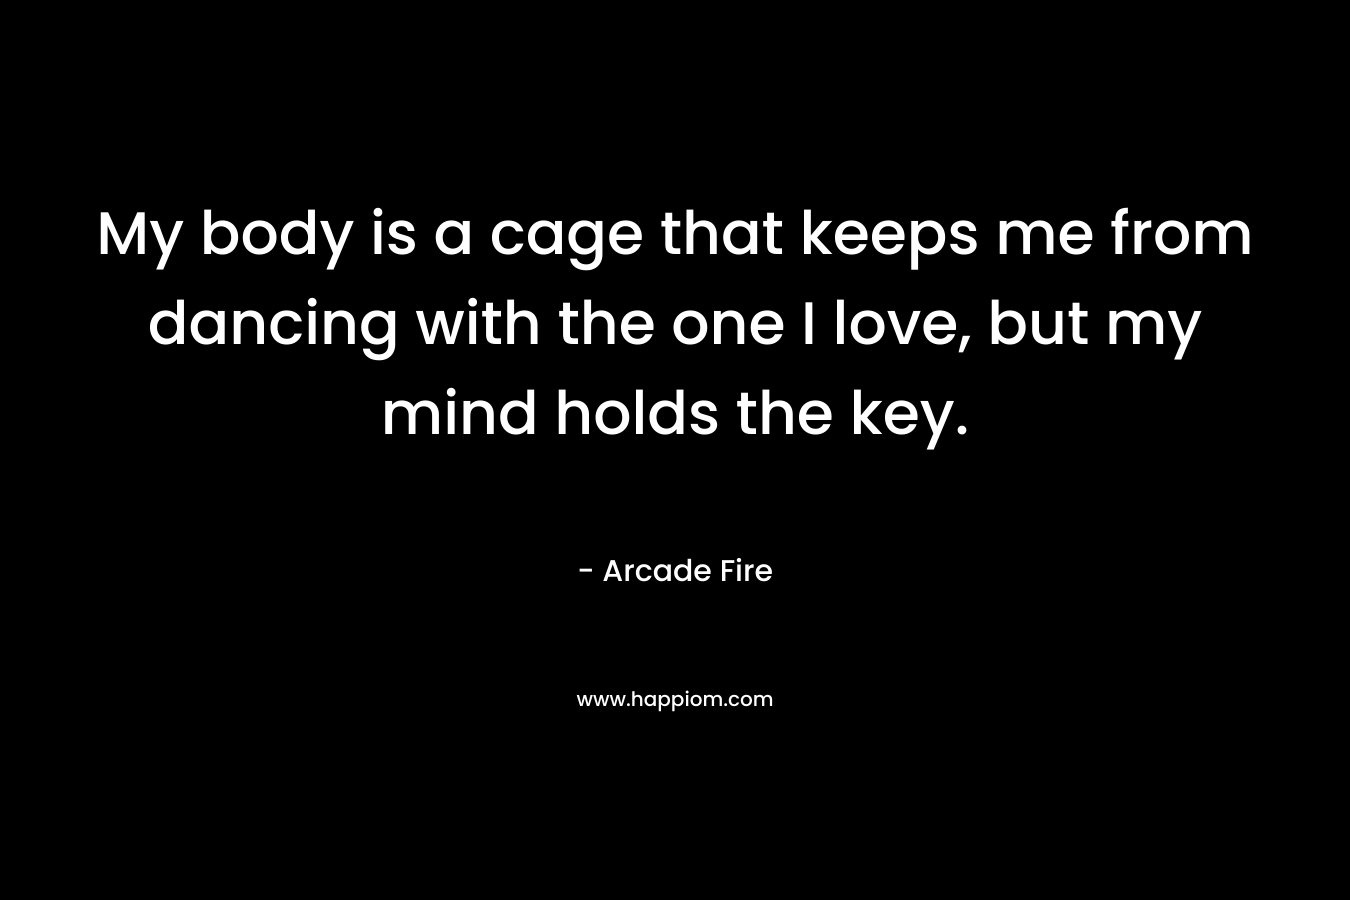 My body is a cage that keeps me from dancing with the one I love, but my mind holds the key. – Arcade Fire